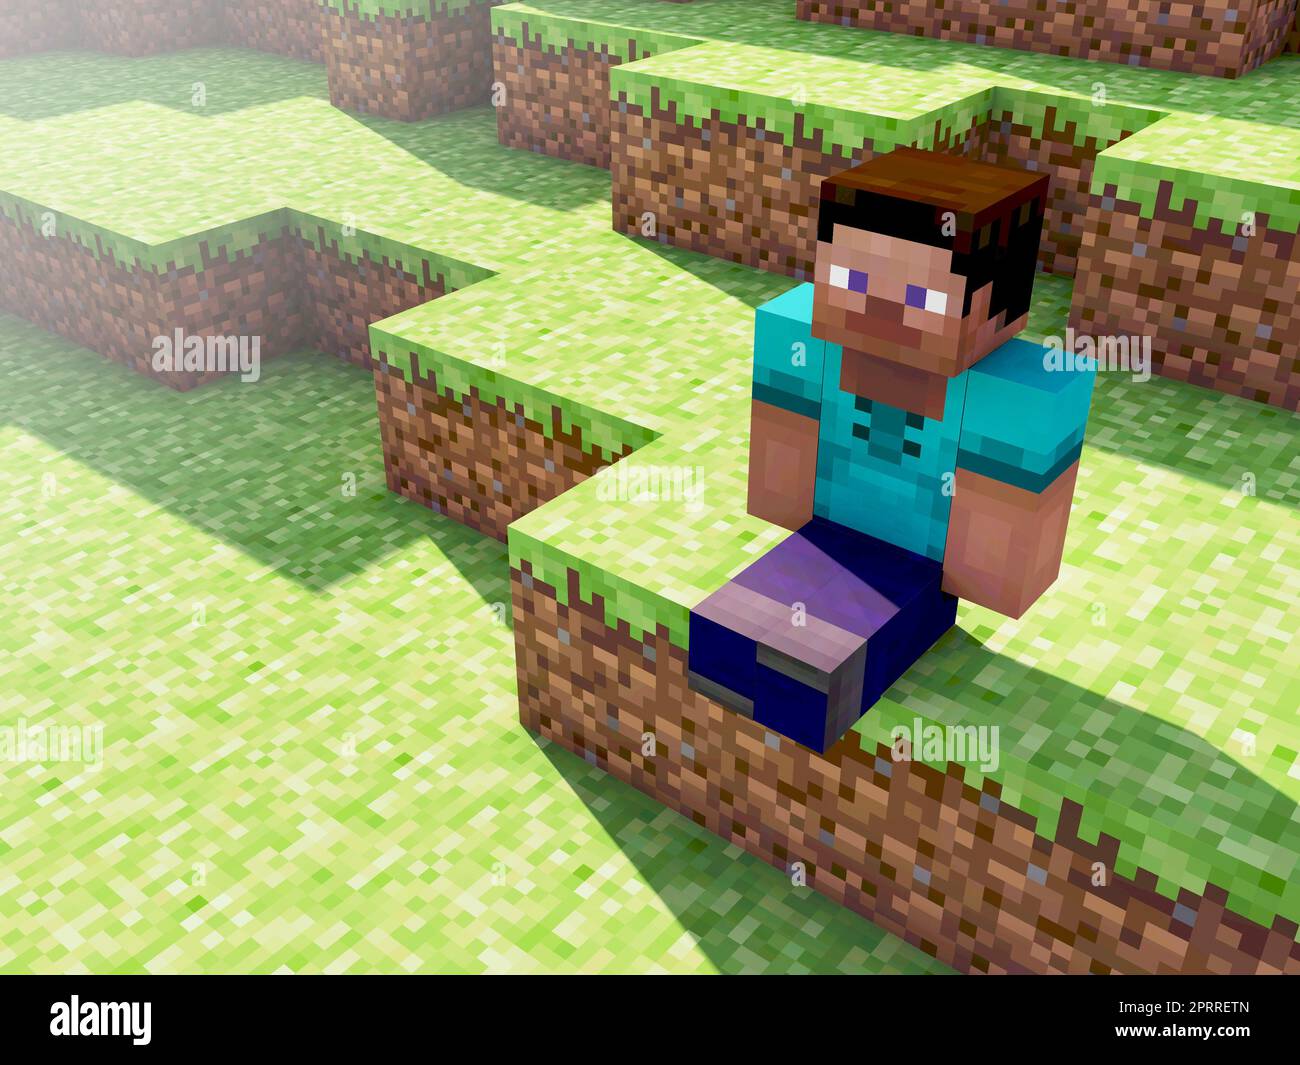 75 Minecraft Pocket Edition Images, Stock Photos, 3D objects, & Vectors